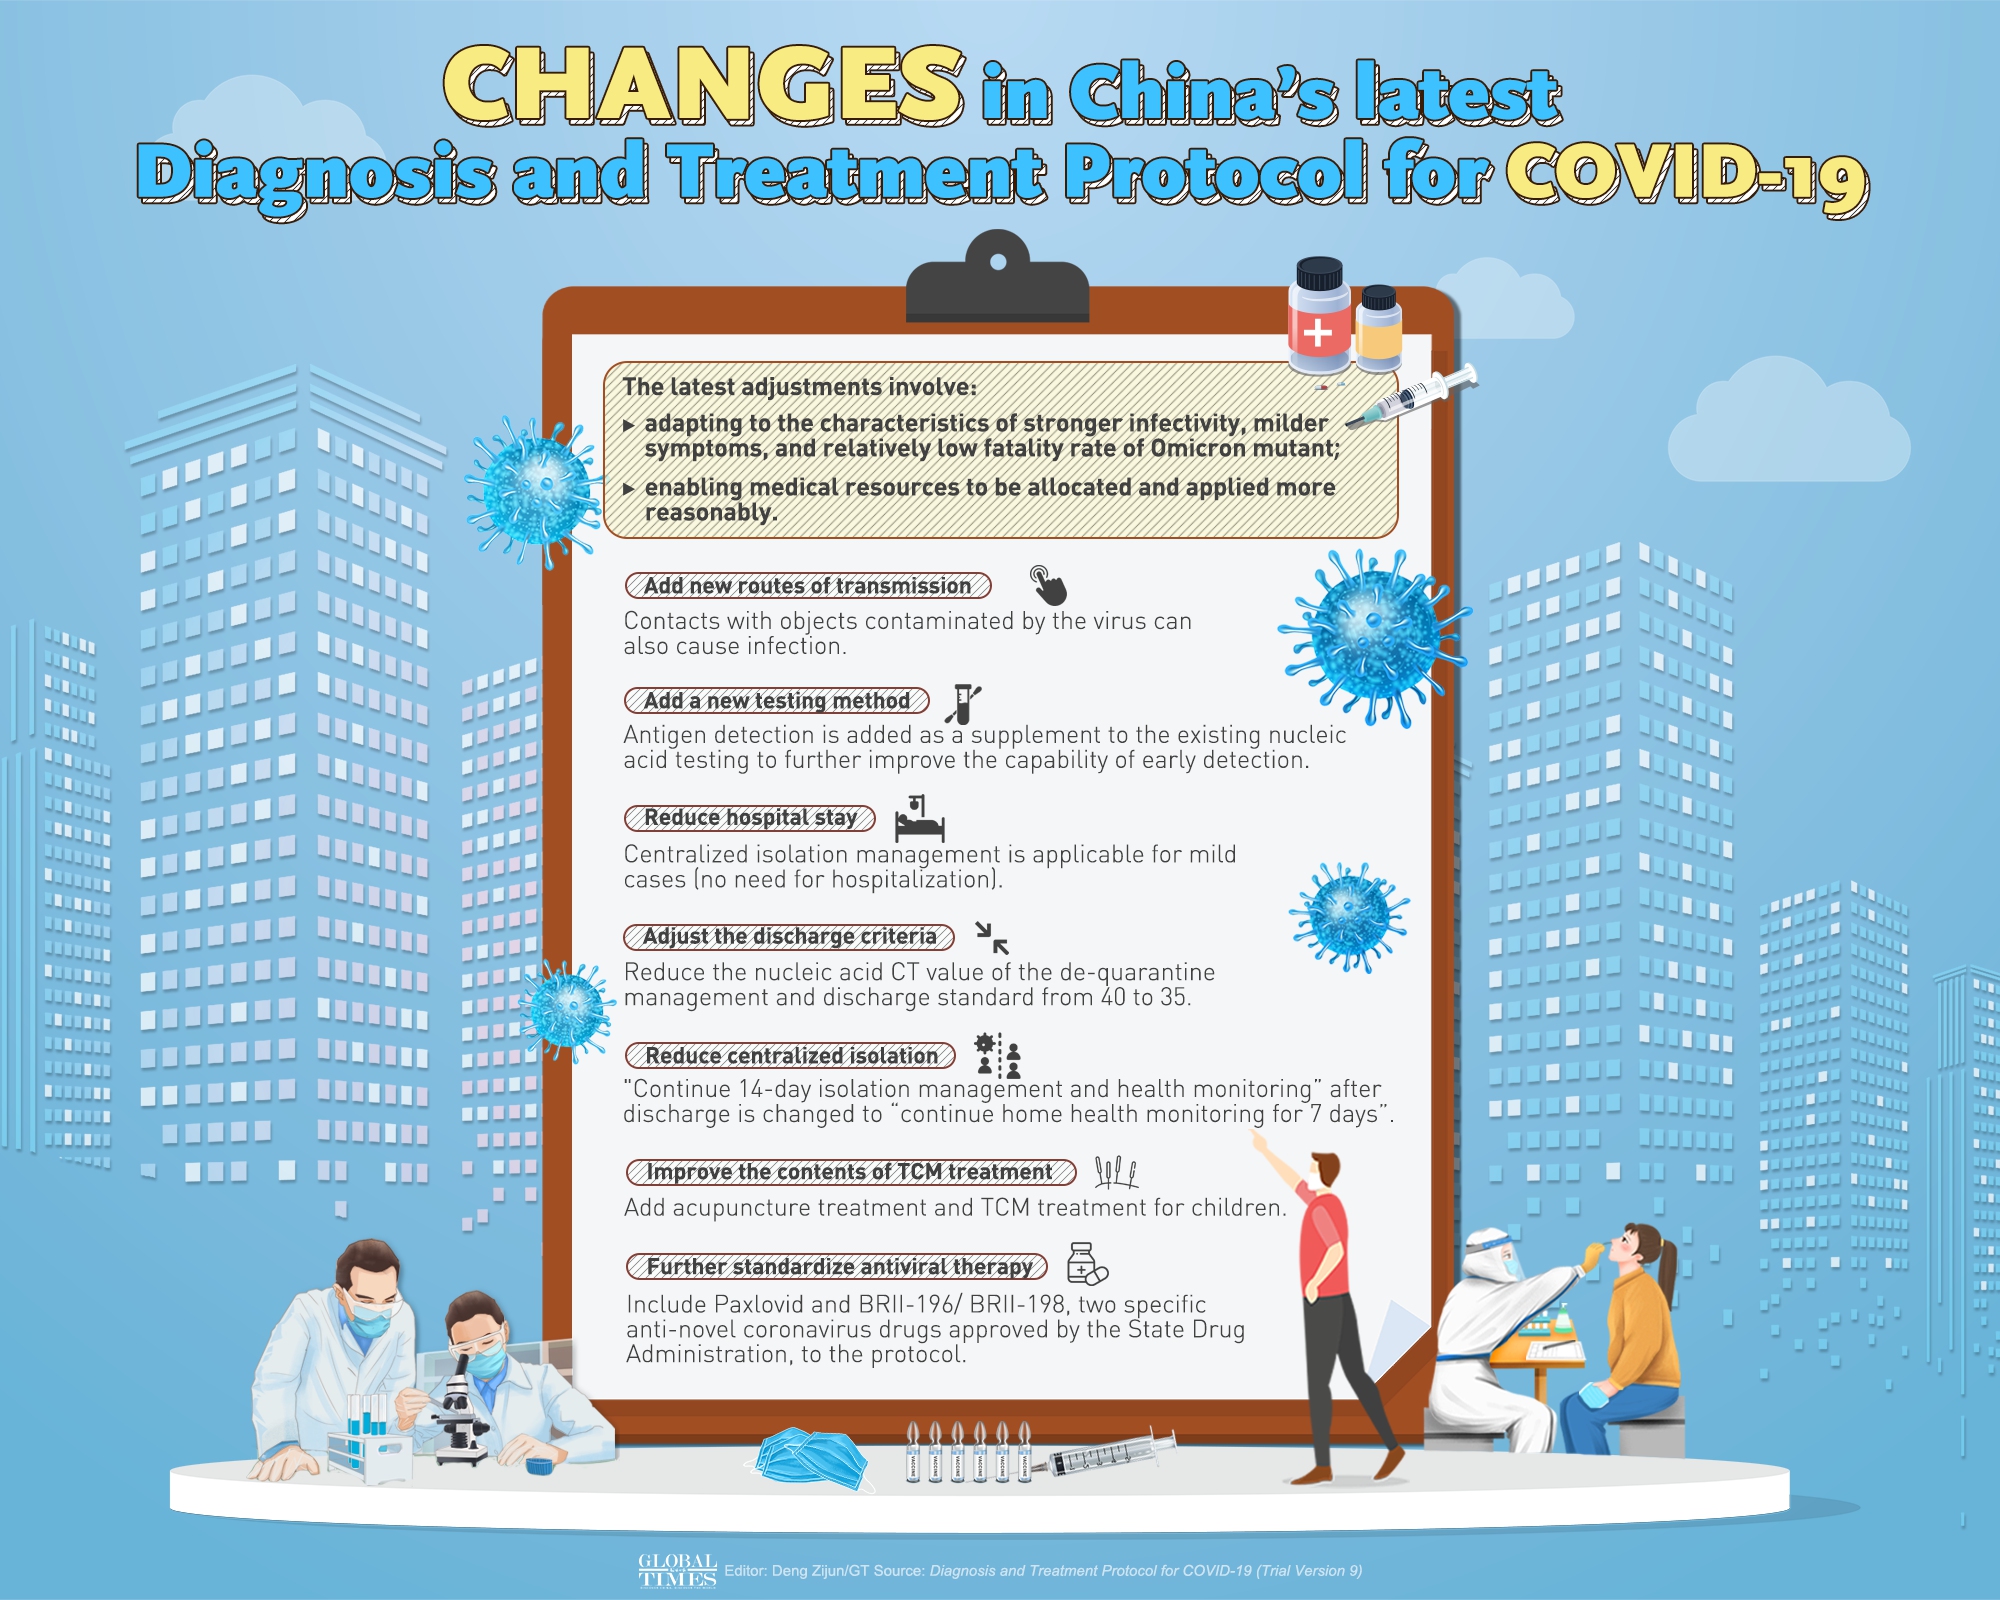 Changes in China’s latest Diagnosis and Treatment Protocol for COVID-19 Infographic: Deng Zijun/GT